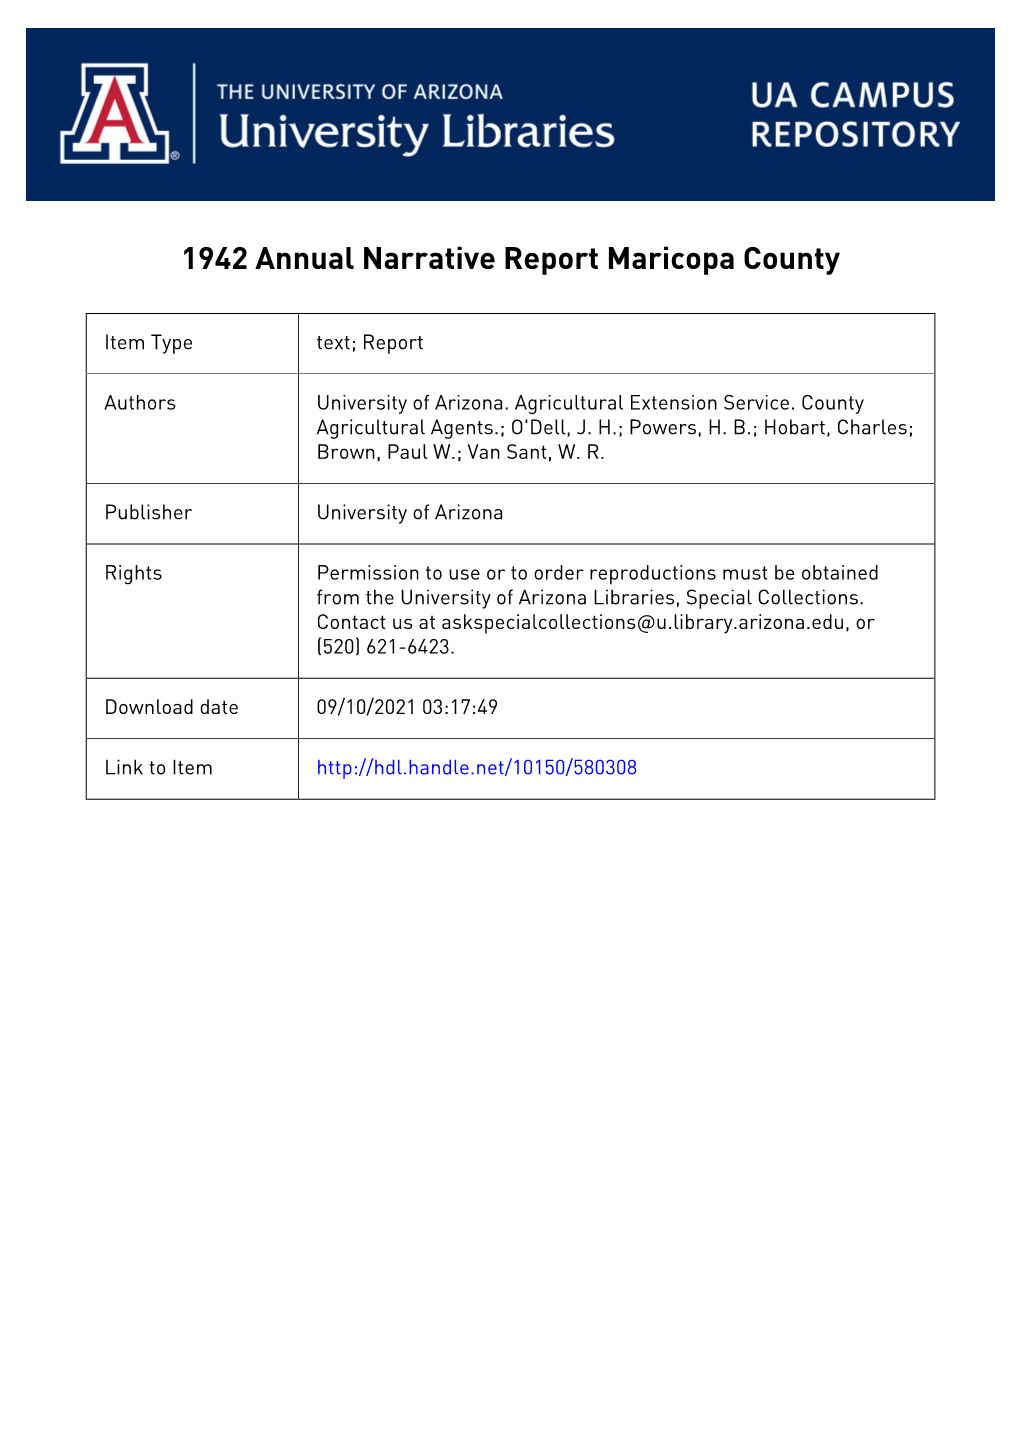 ANNUAL NARRATIVE REPORT of MARICOPA COUNTY December 1